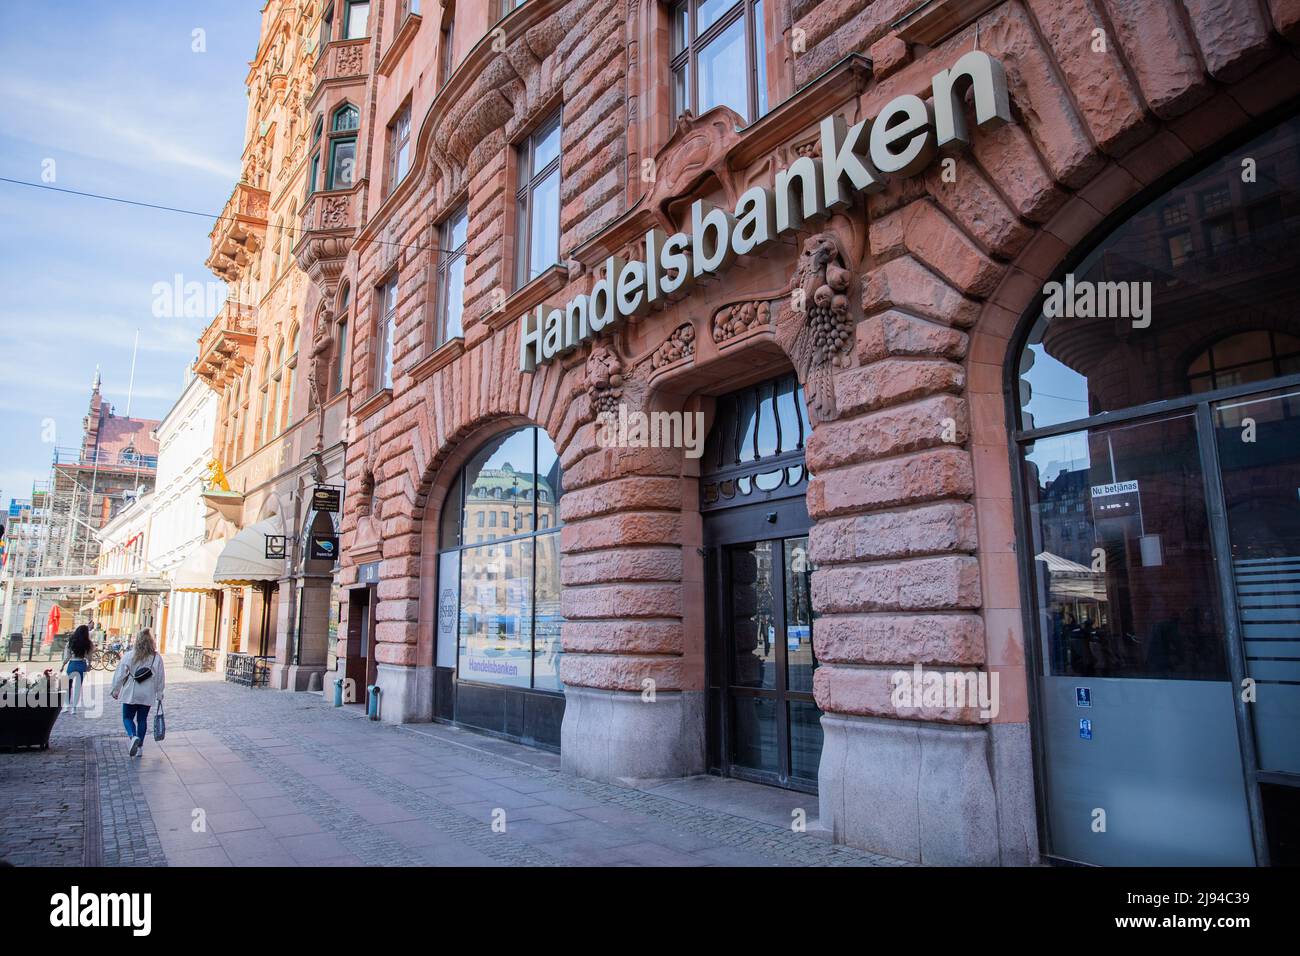 Malmö, Sweden, 20th April 2022: Entry of the Handelsbanken in Malmo, one of the most important banks in Scandinavia Stock Photo